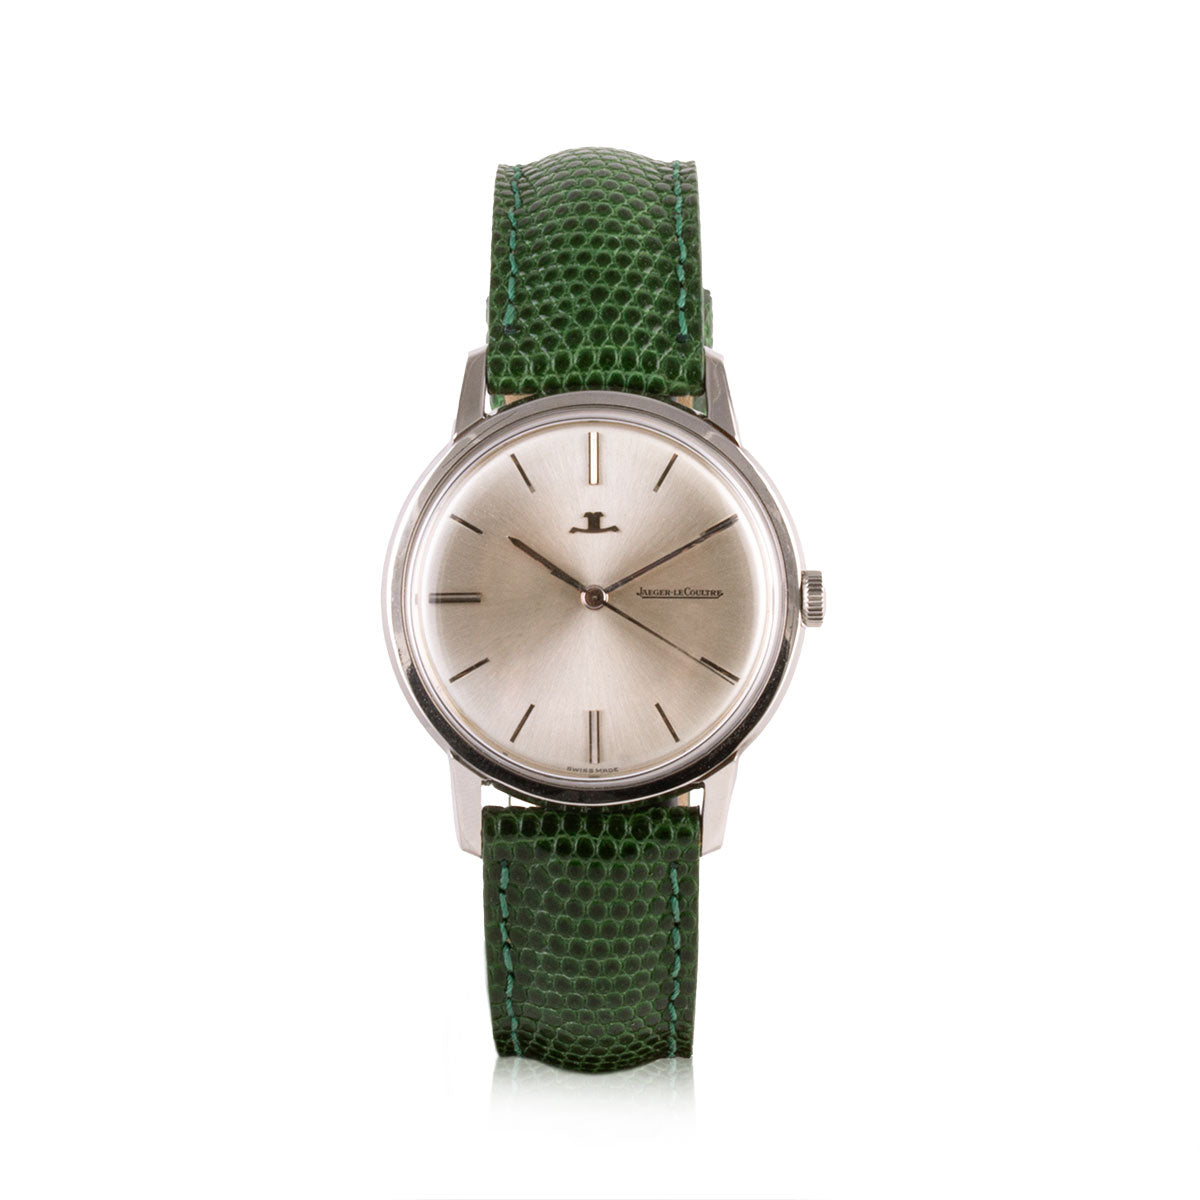 Second-hand watch - Jaeger Lecoultre - 2600€